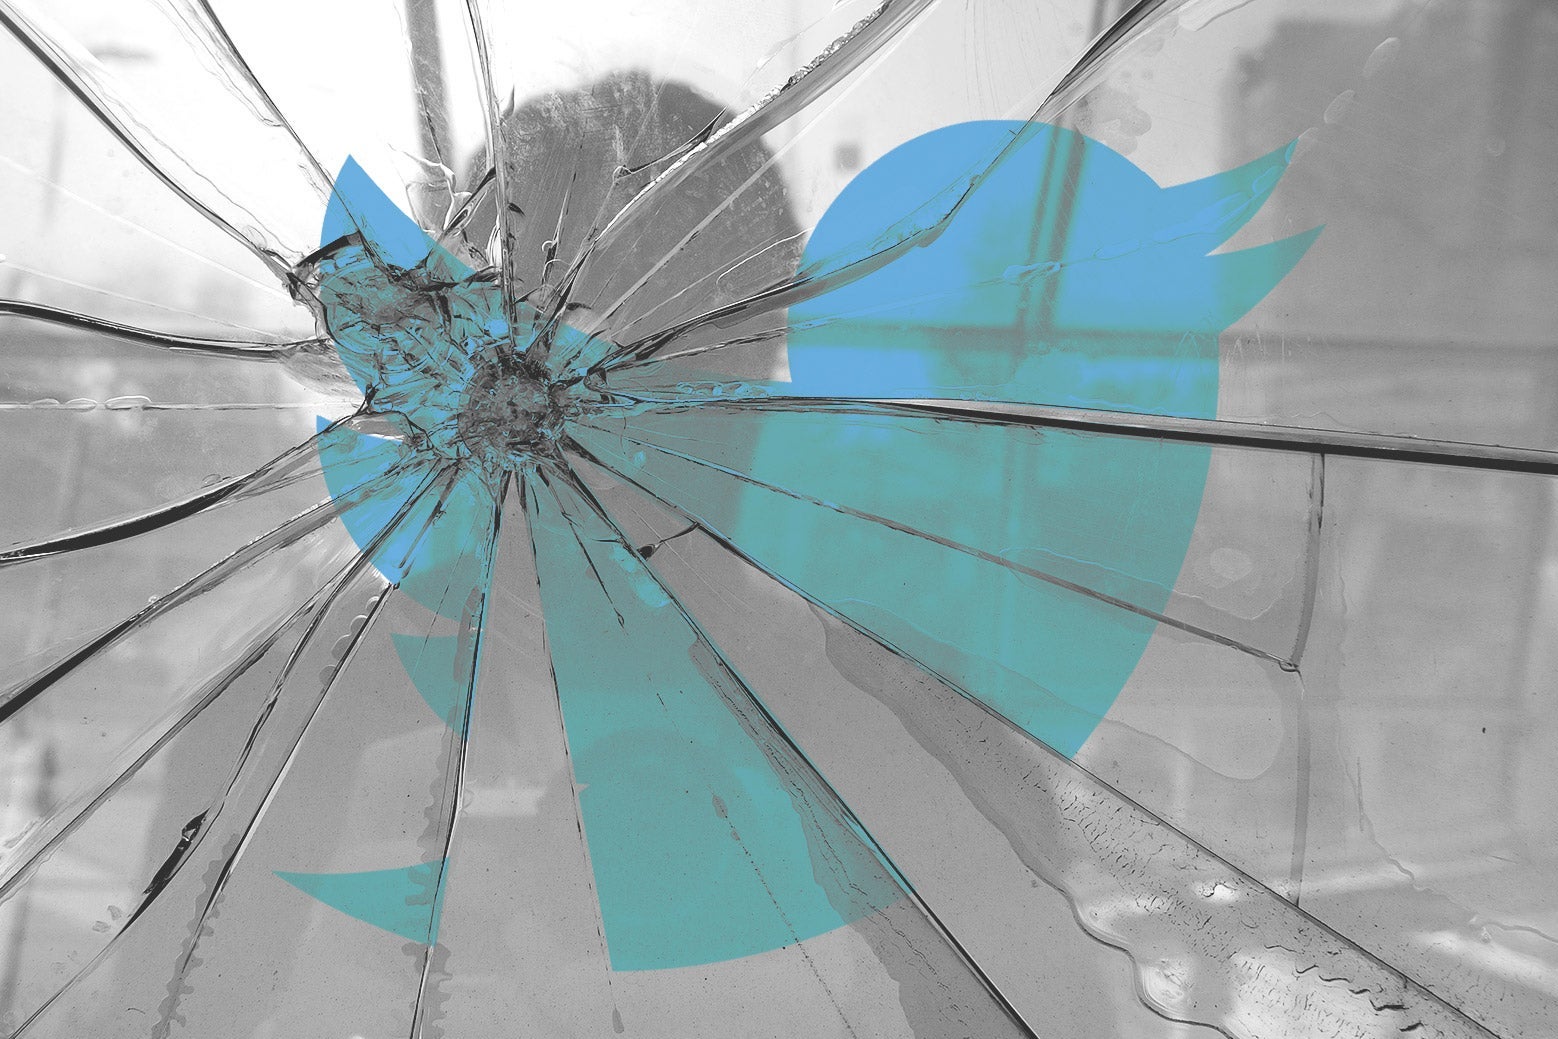 A shadow of a person looking in a shattered mirror with the Twitter logo on it.